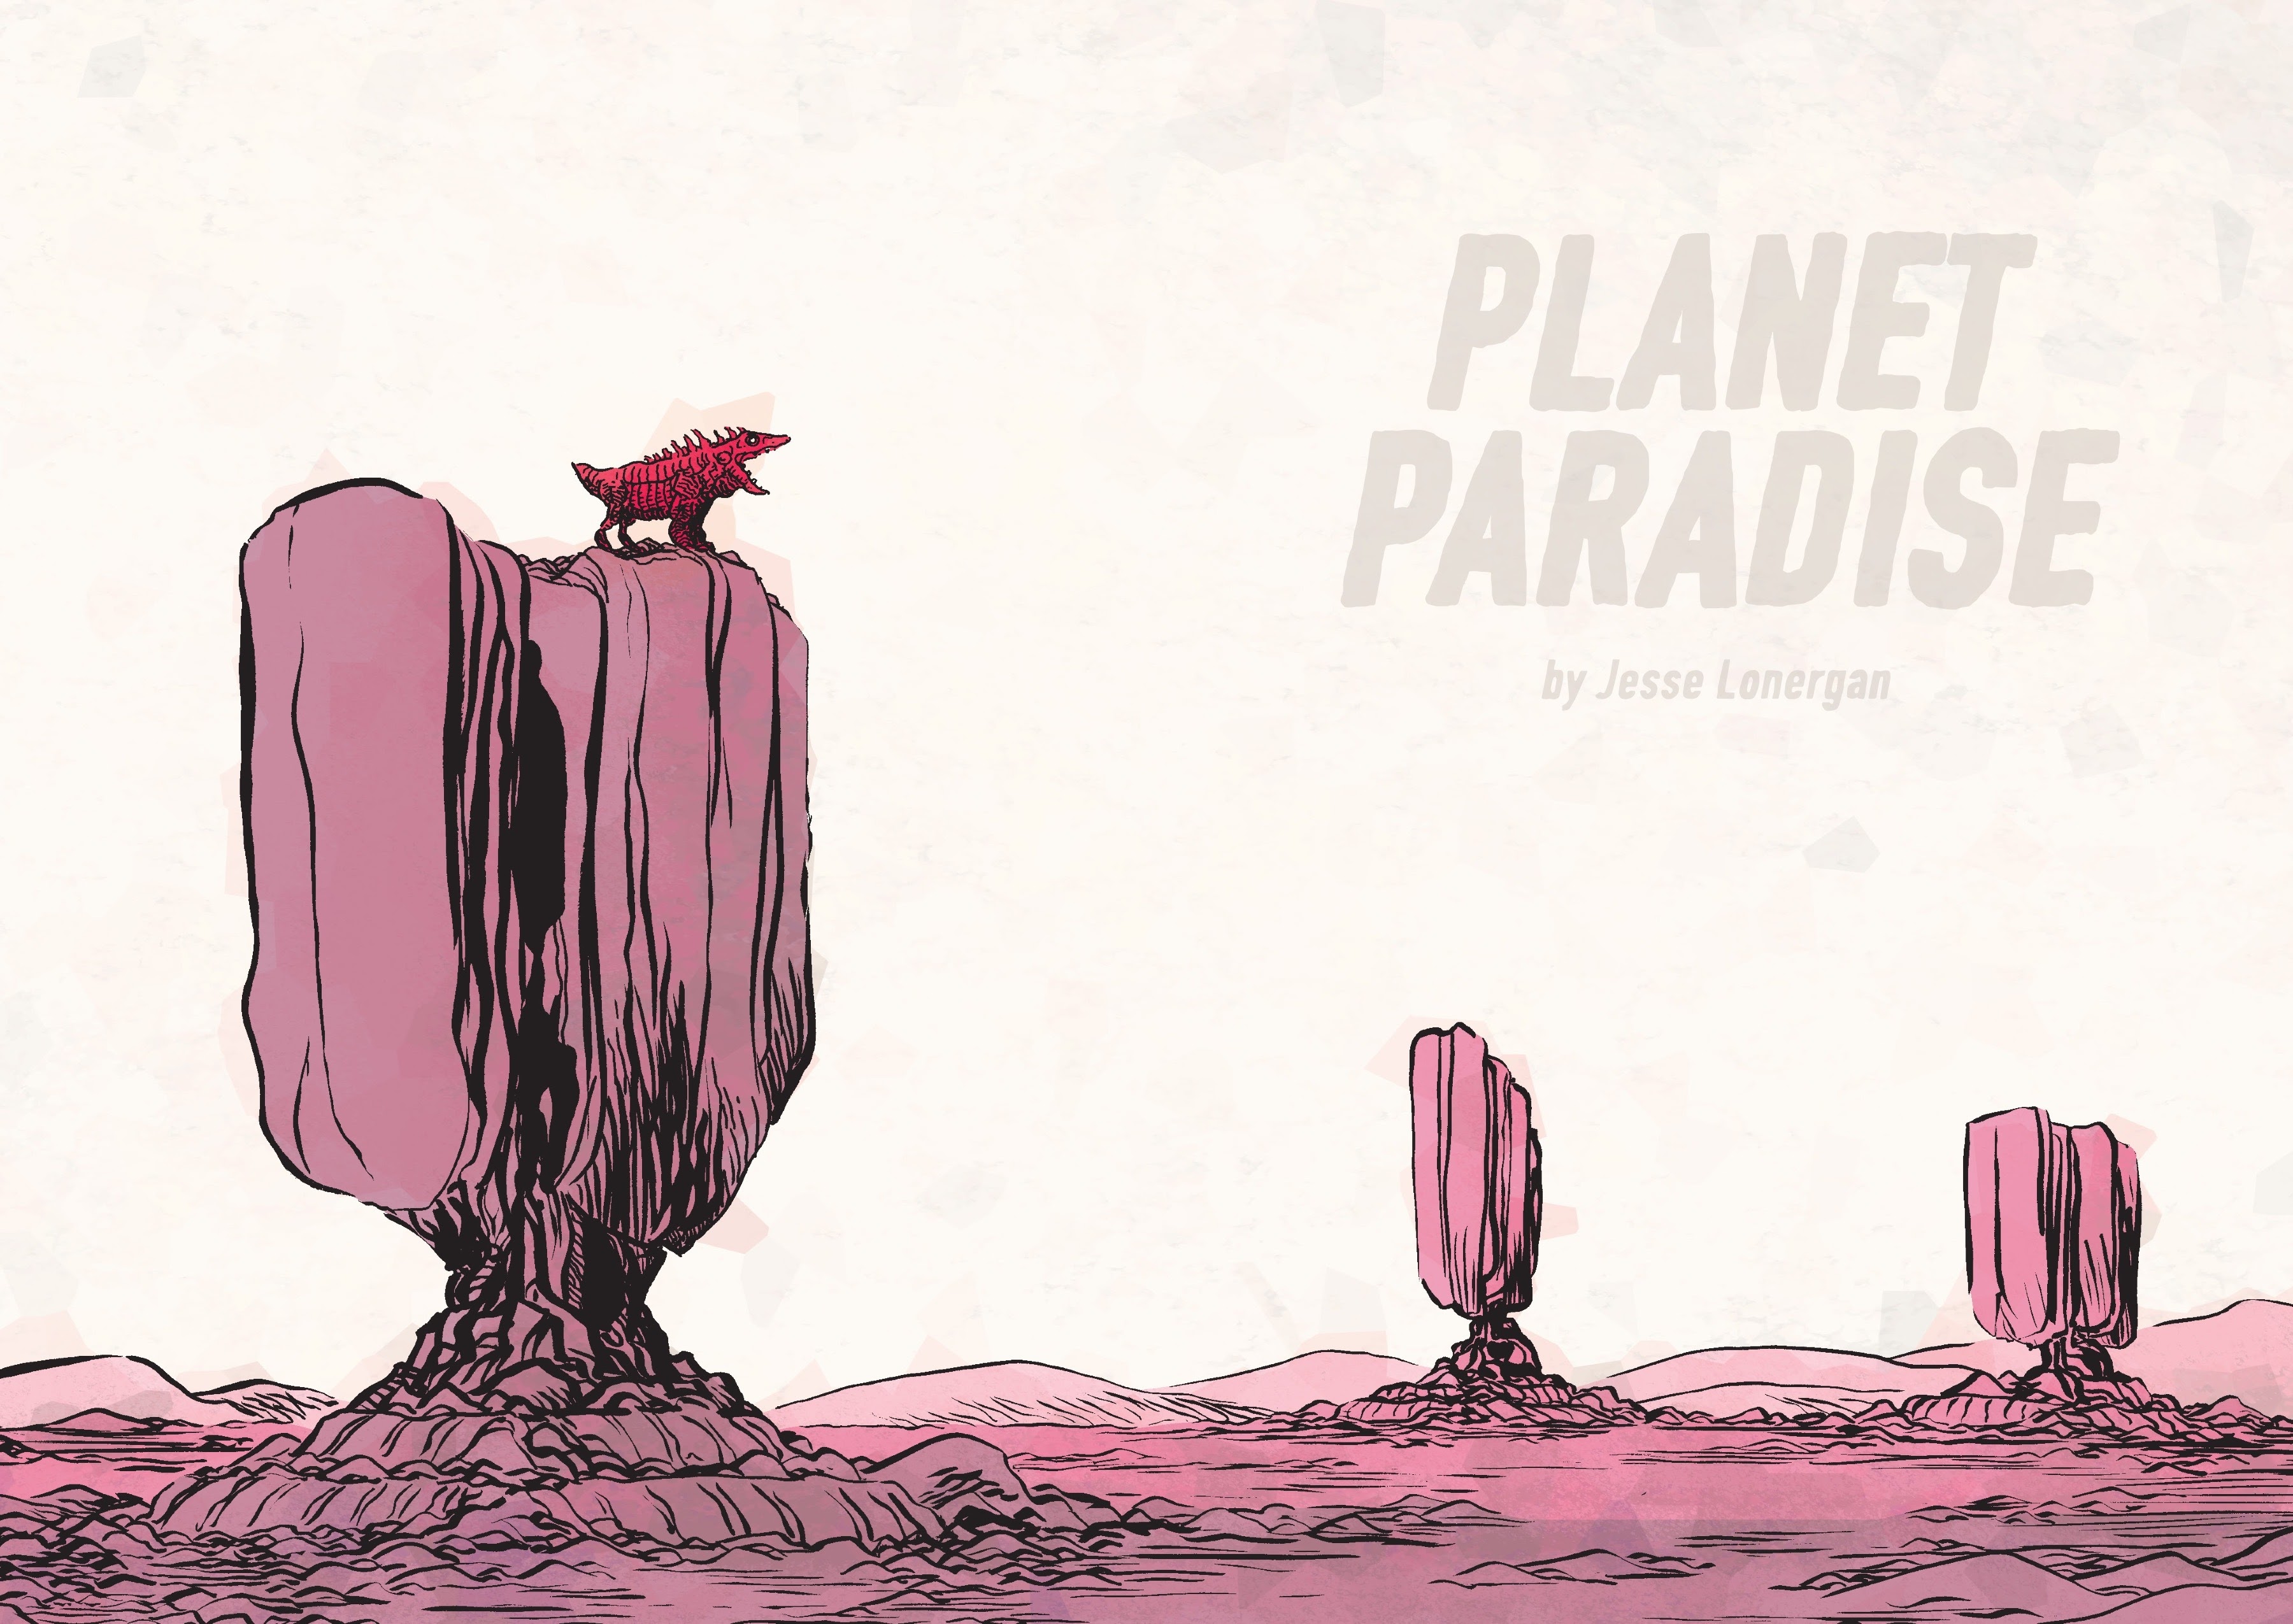 Read online Planet Paradise comic -  Issue # TPB - 4